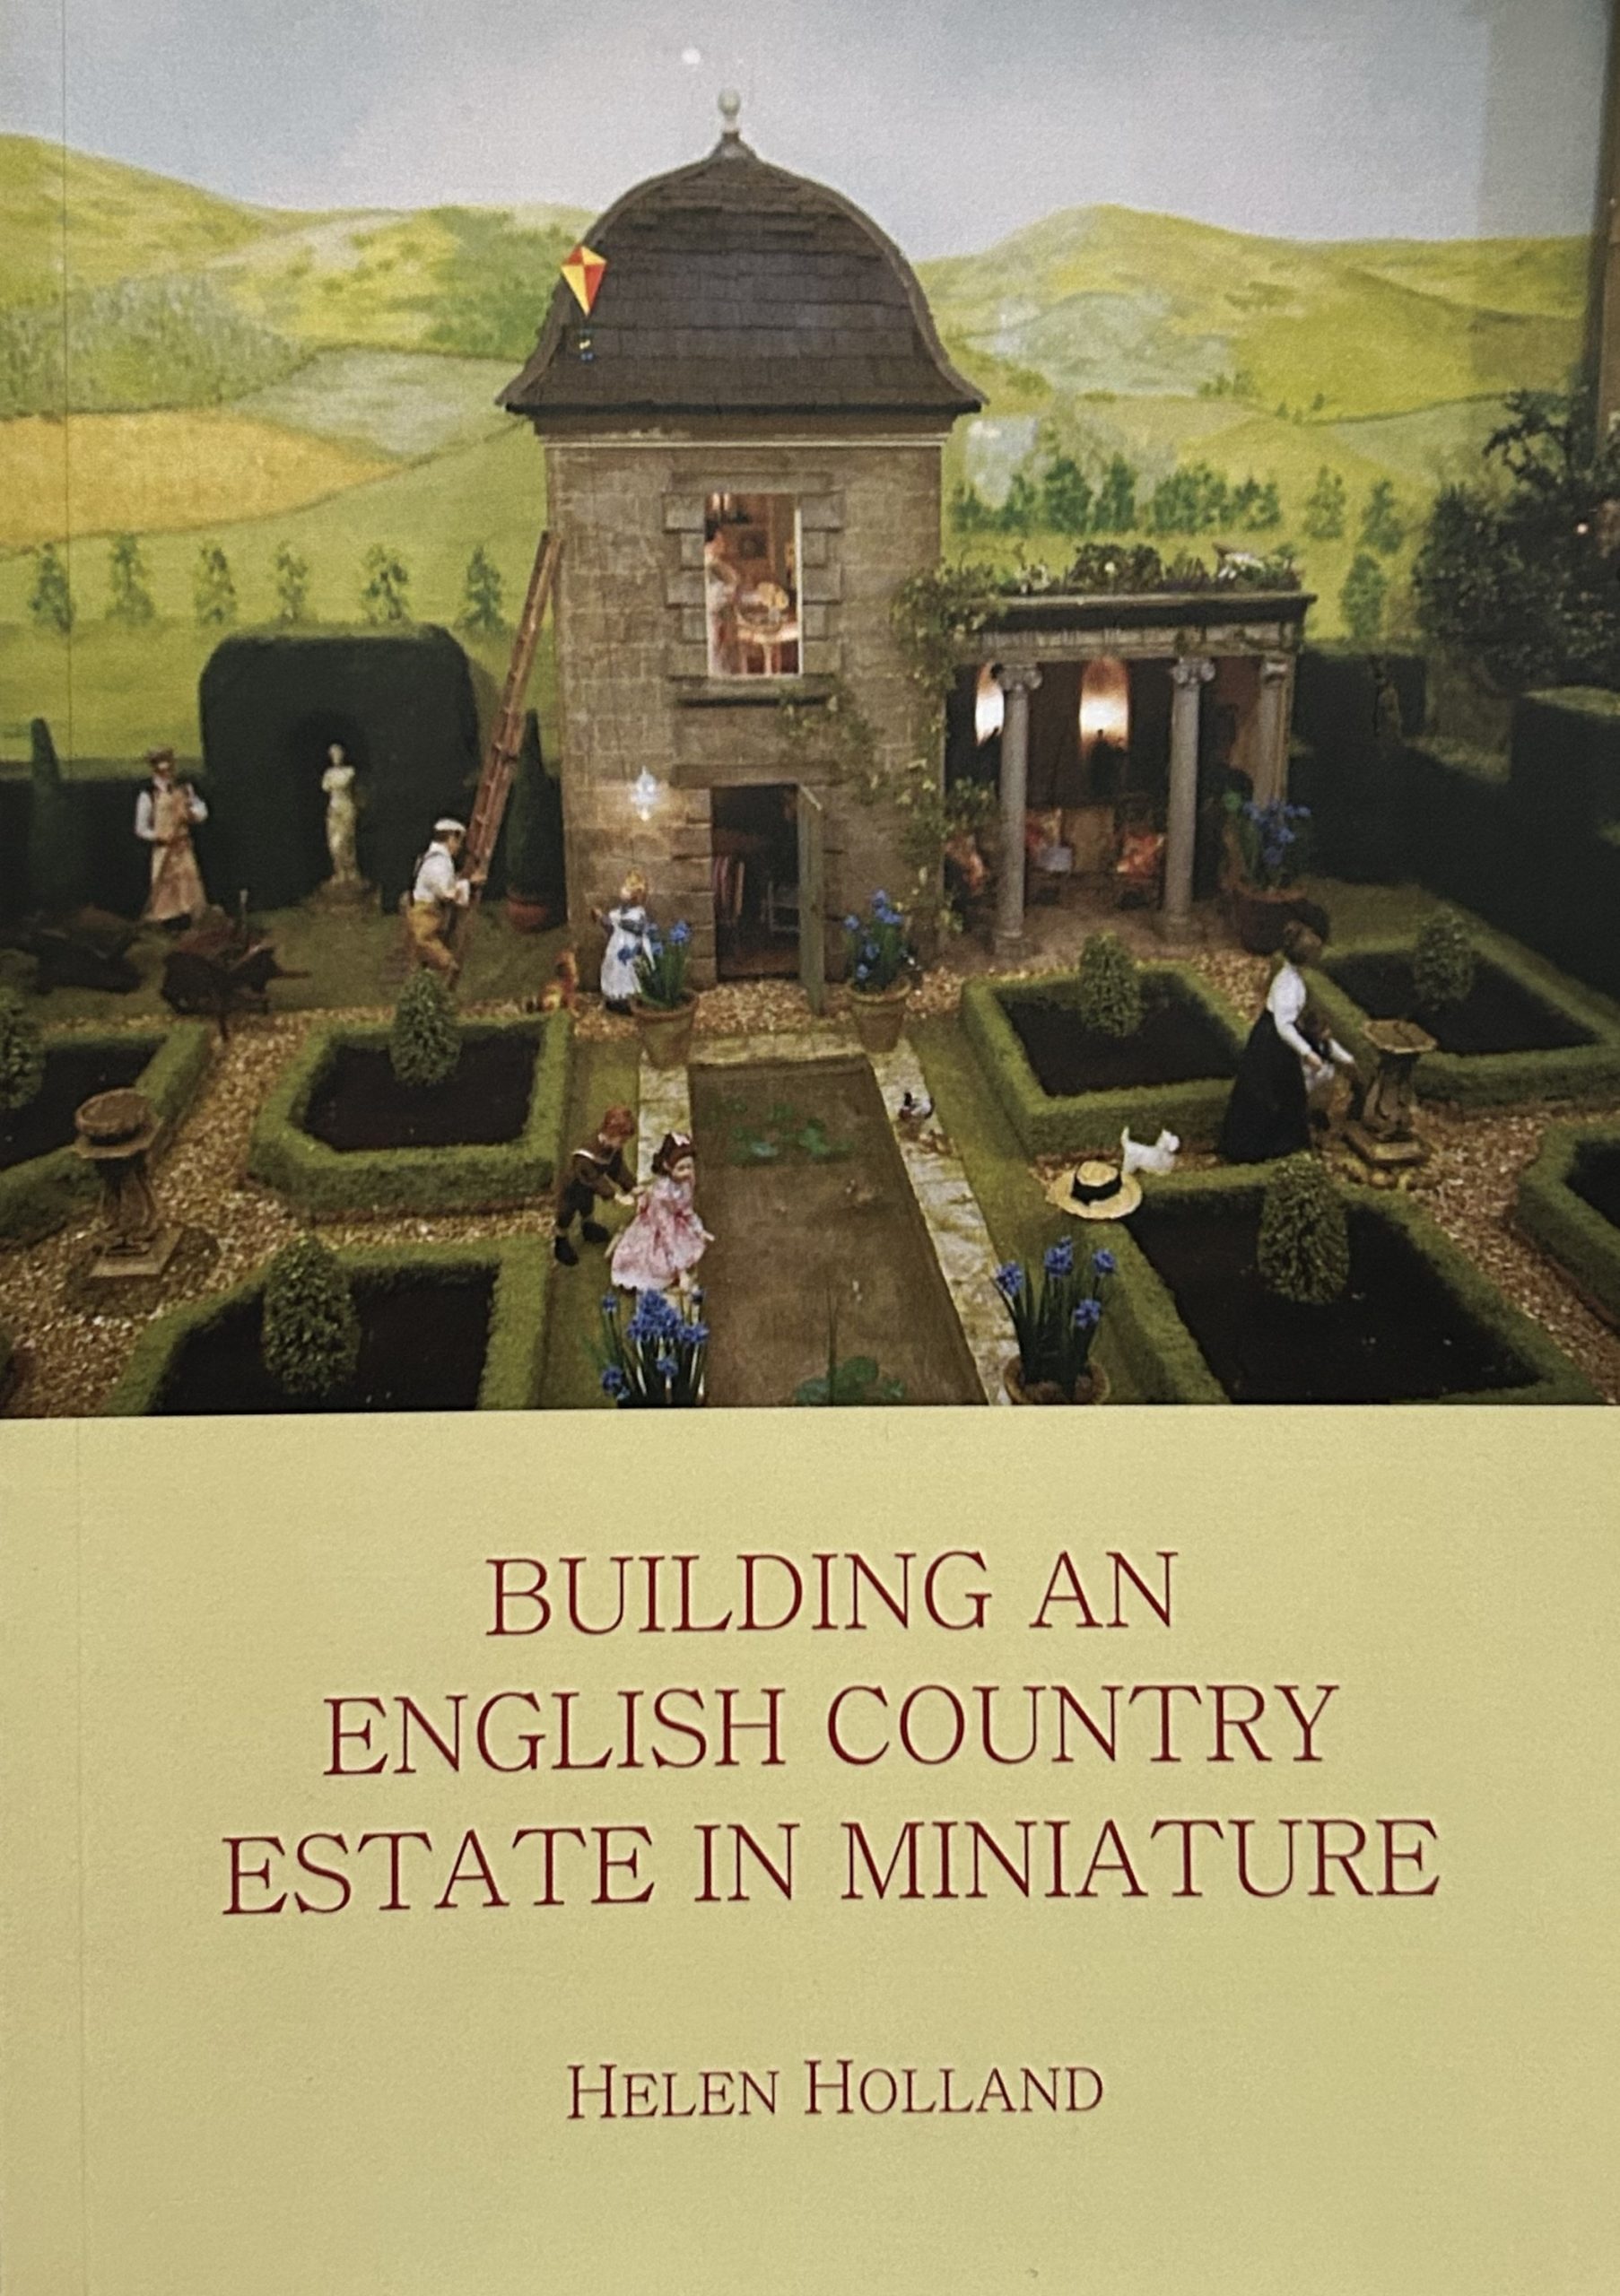 Building an English Country Estate in Miniature by Helen Holland